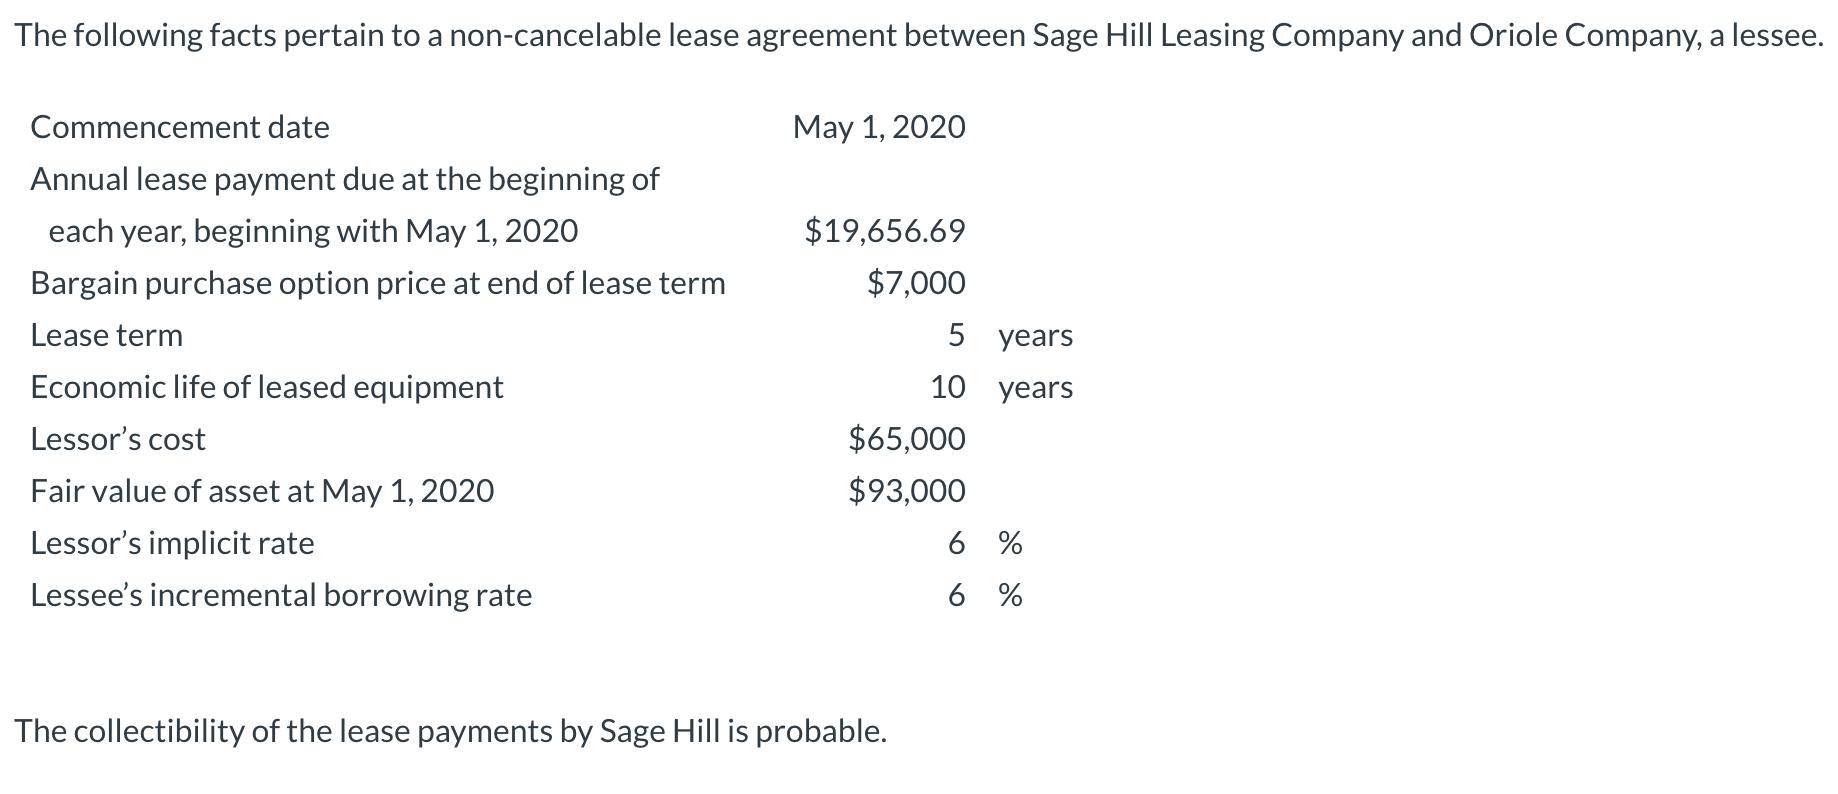 The following facts pertain to a non-cancelable lease agreement between Sage Hill Leasing Company and Oriole Company, a lesse